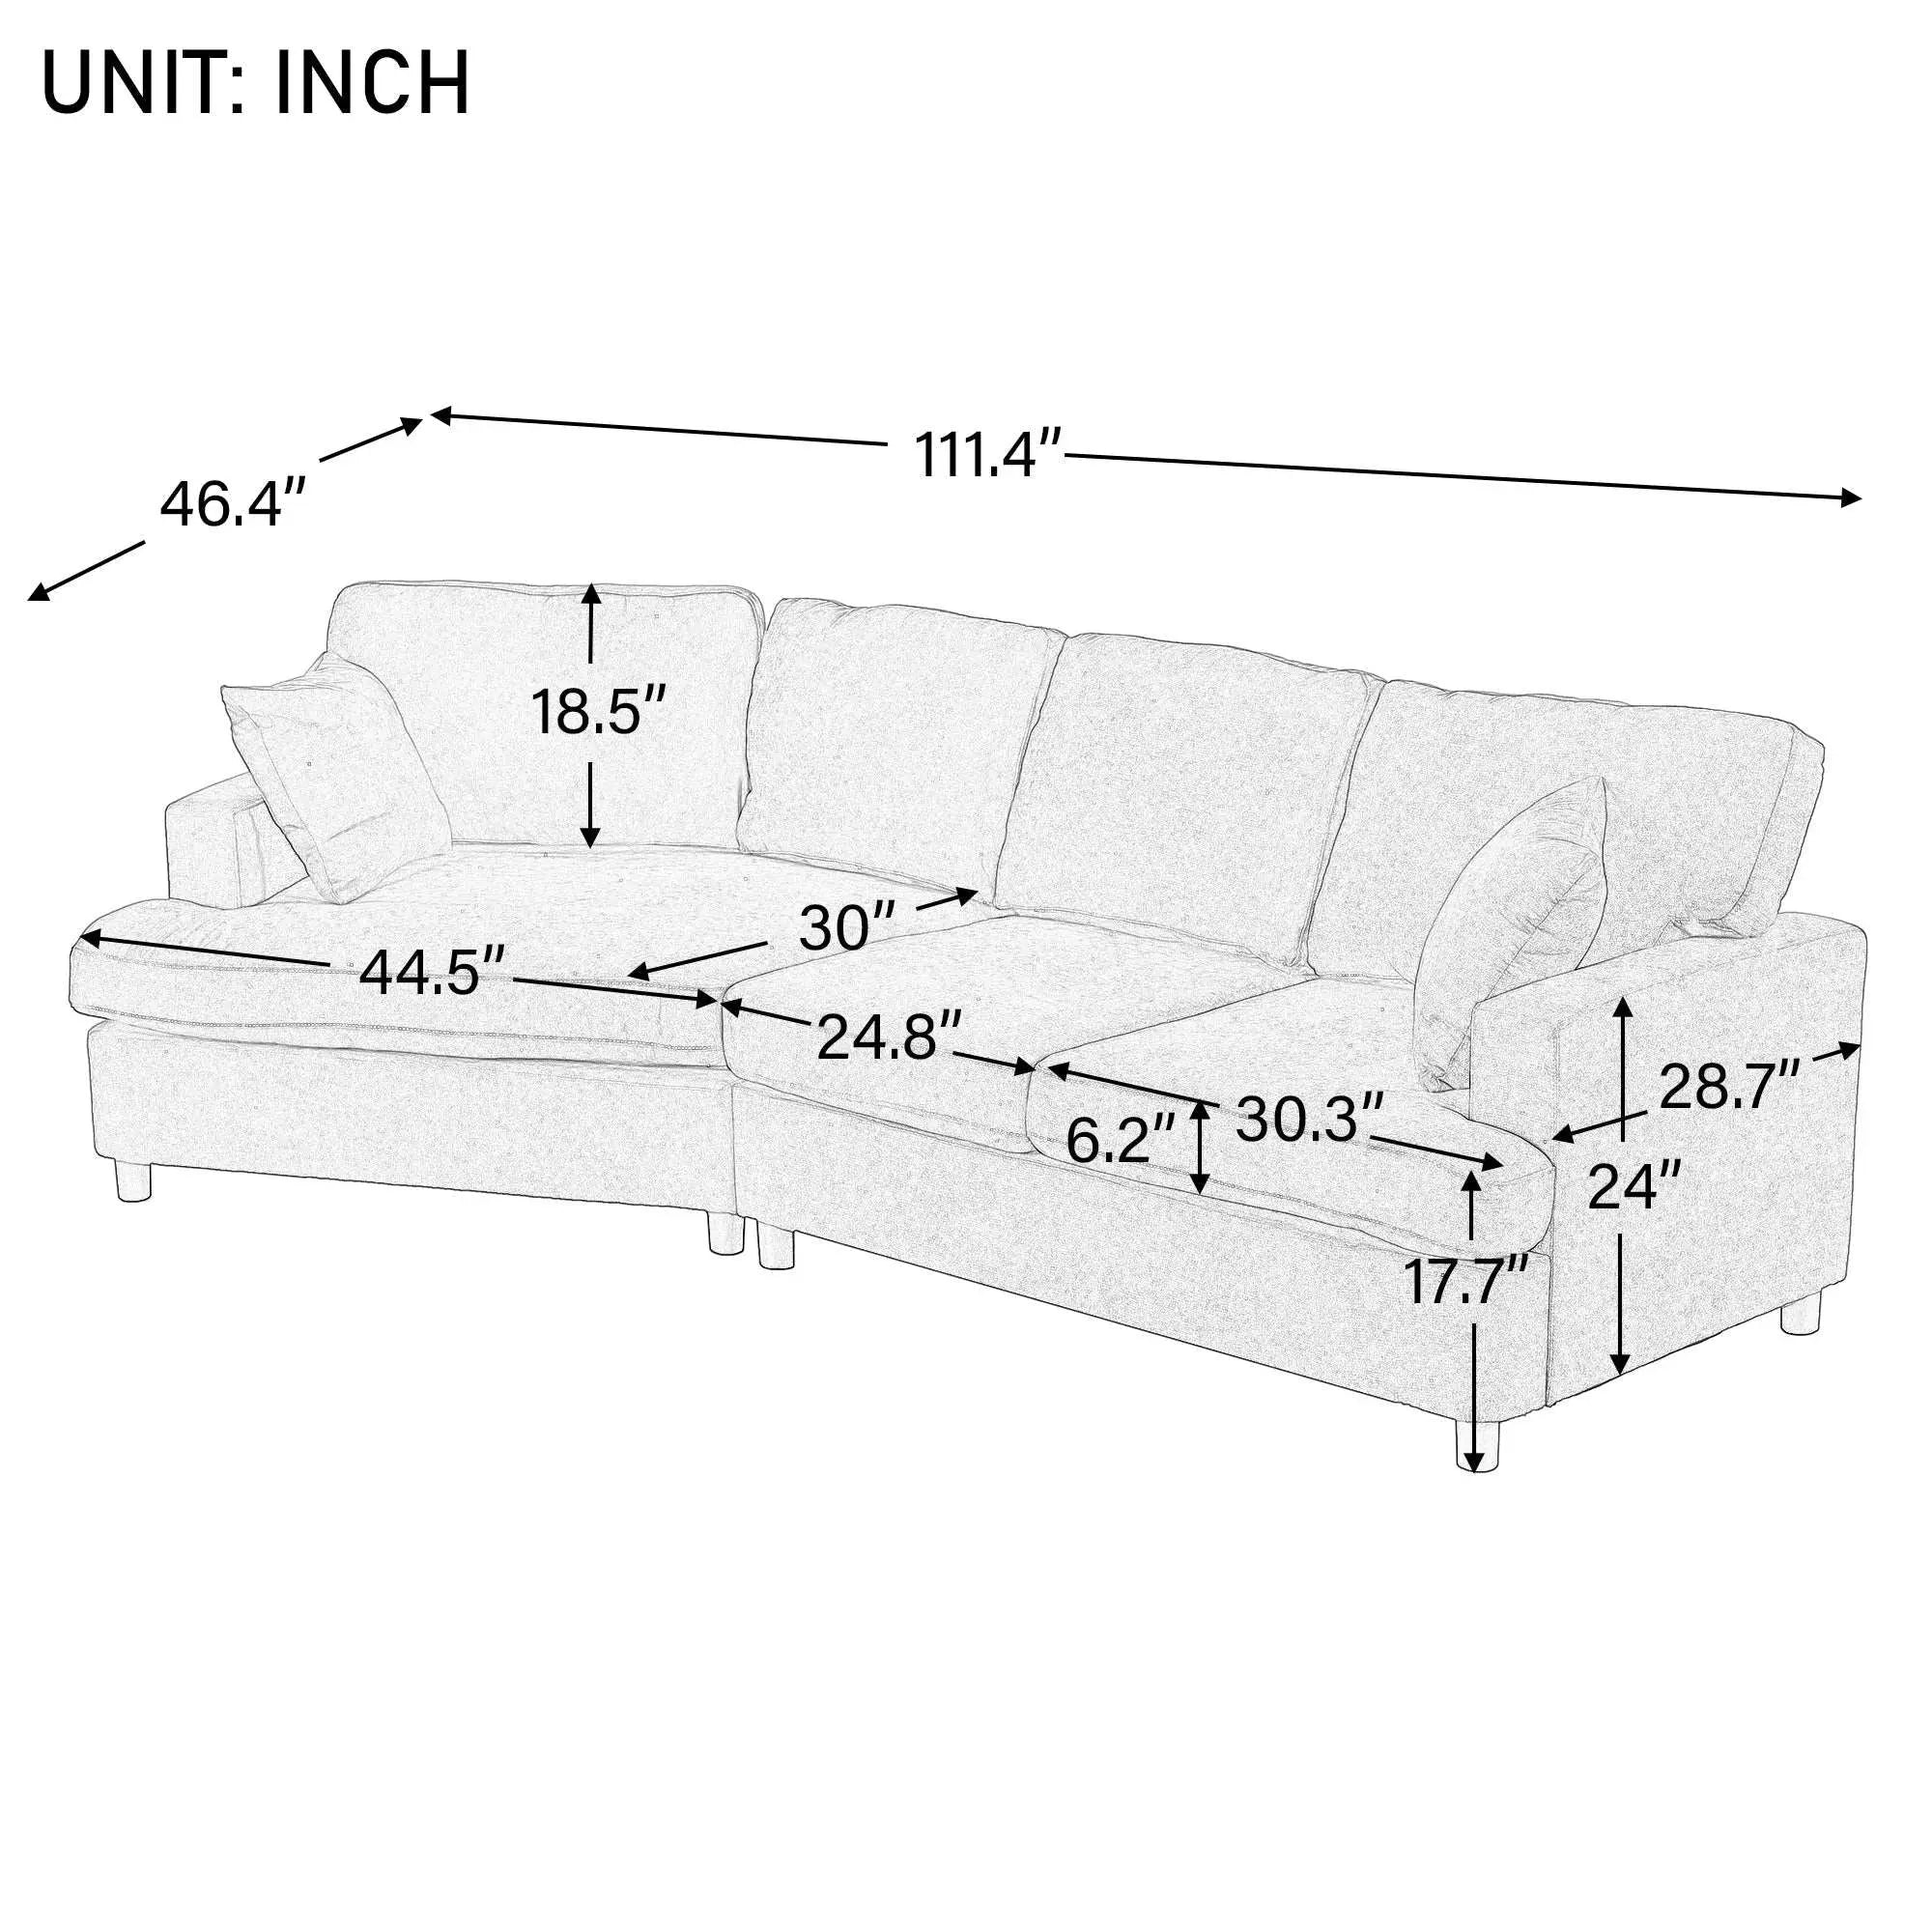 Bellemave 111.4" 3 Seat Streamlined Sofa with Removable Back and Seat Cushions and 2 pillows